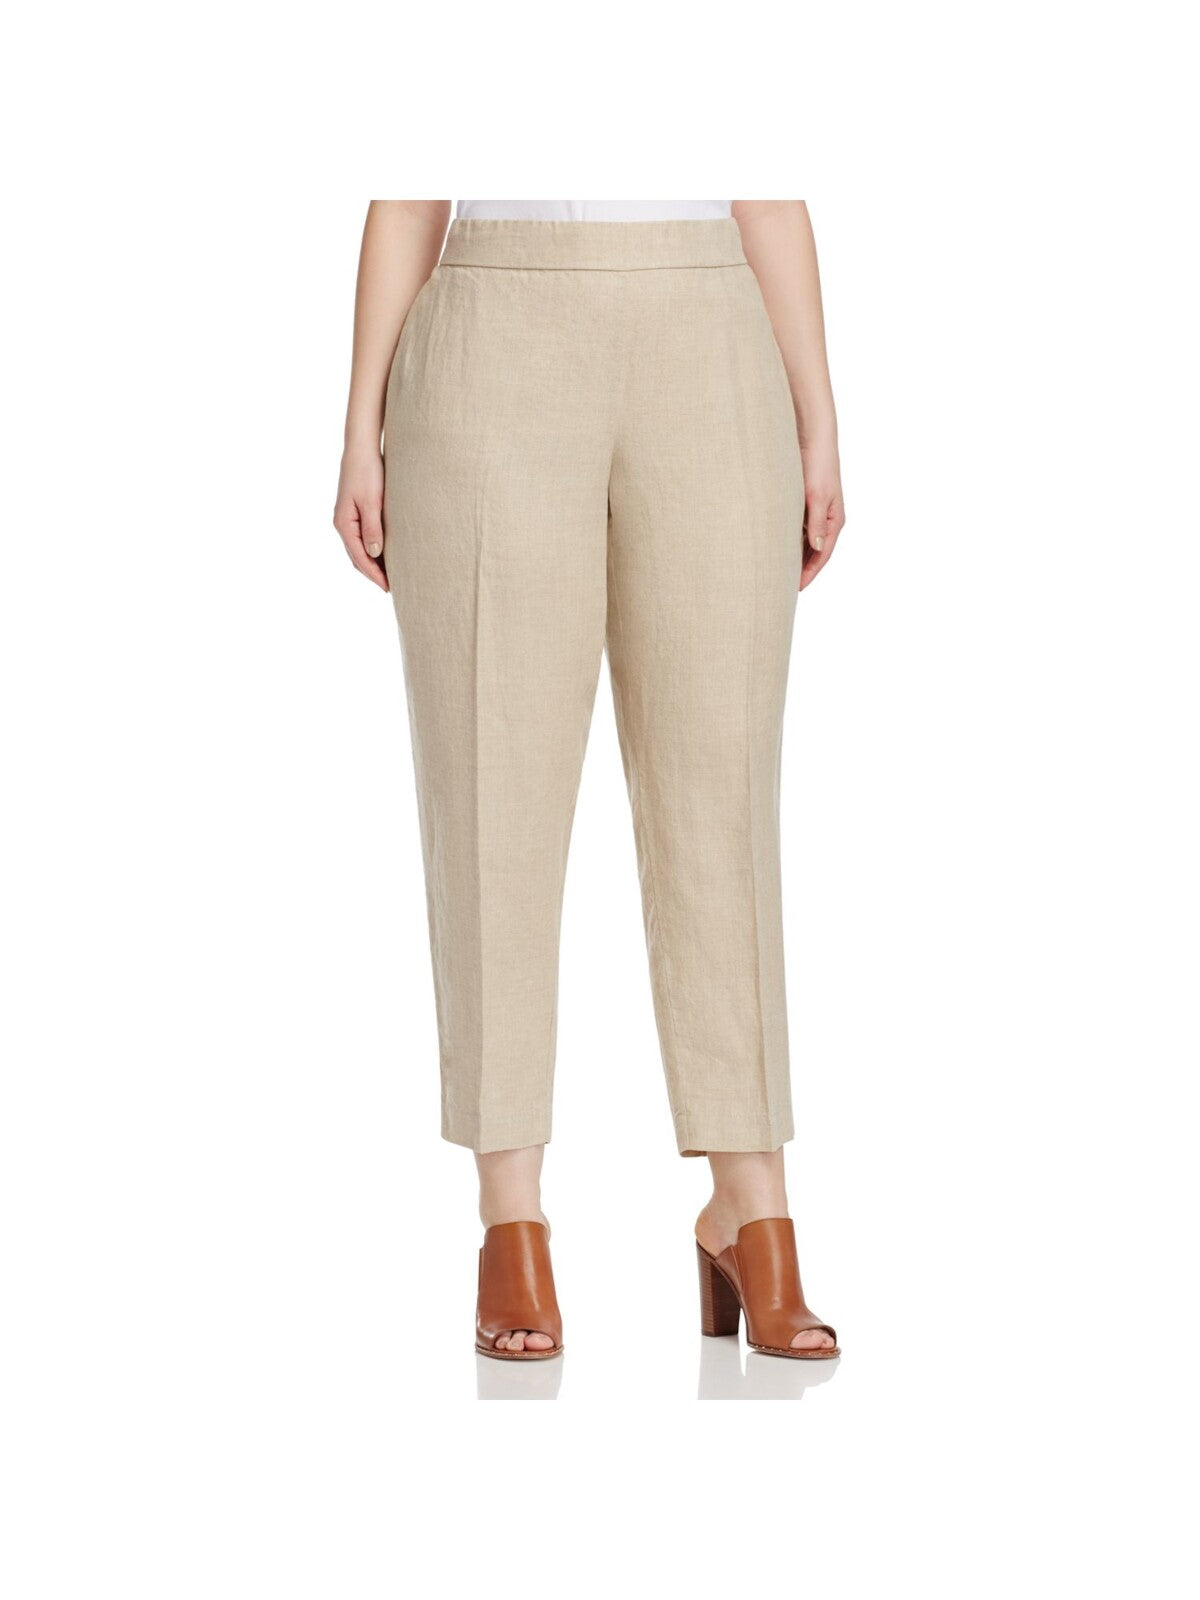 EILEEN FISHER Womens Beige Stretch Darted Tapered Ankle Pants Plus 2X